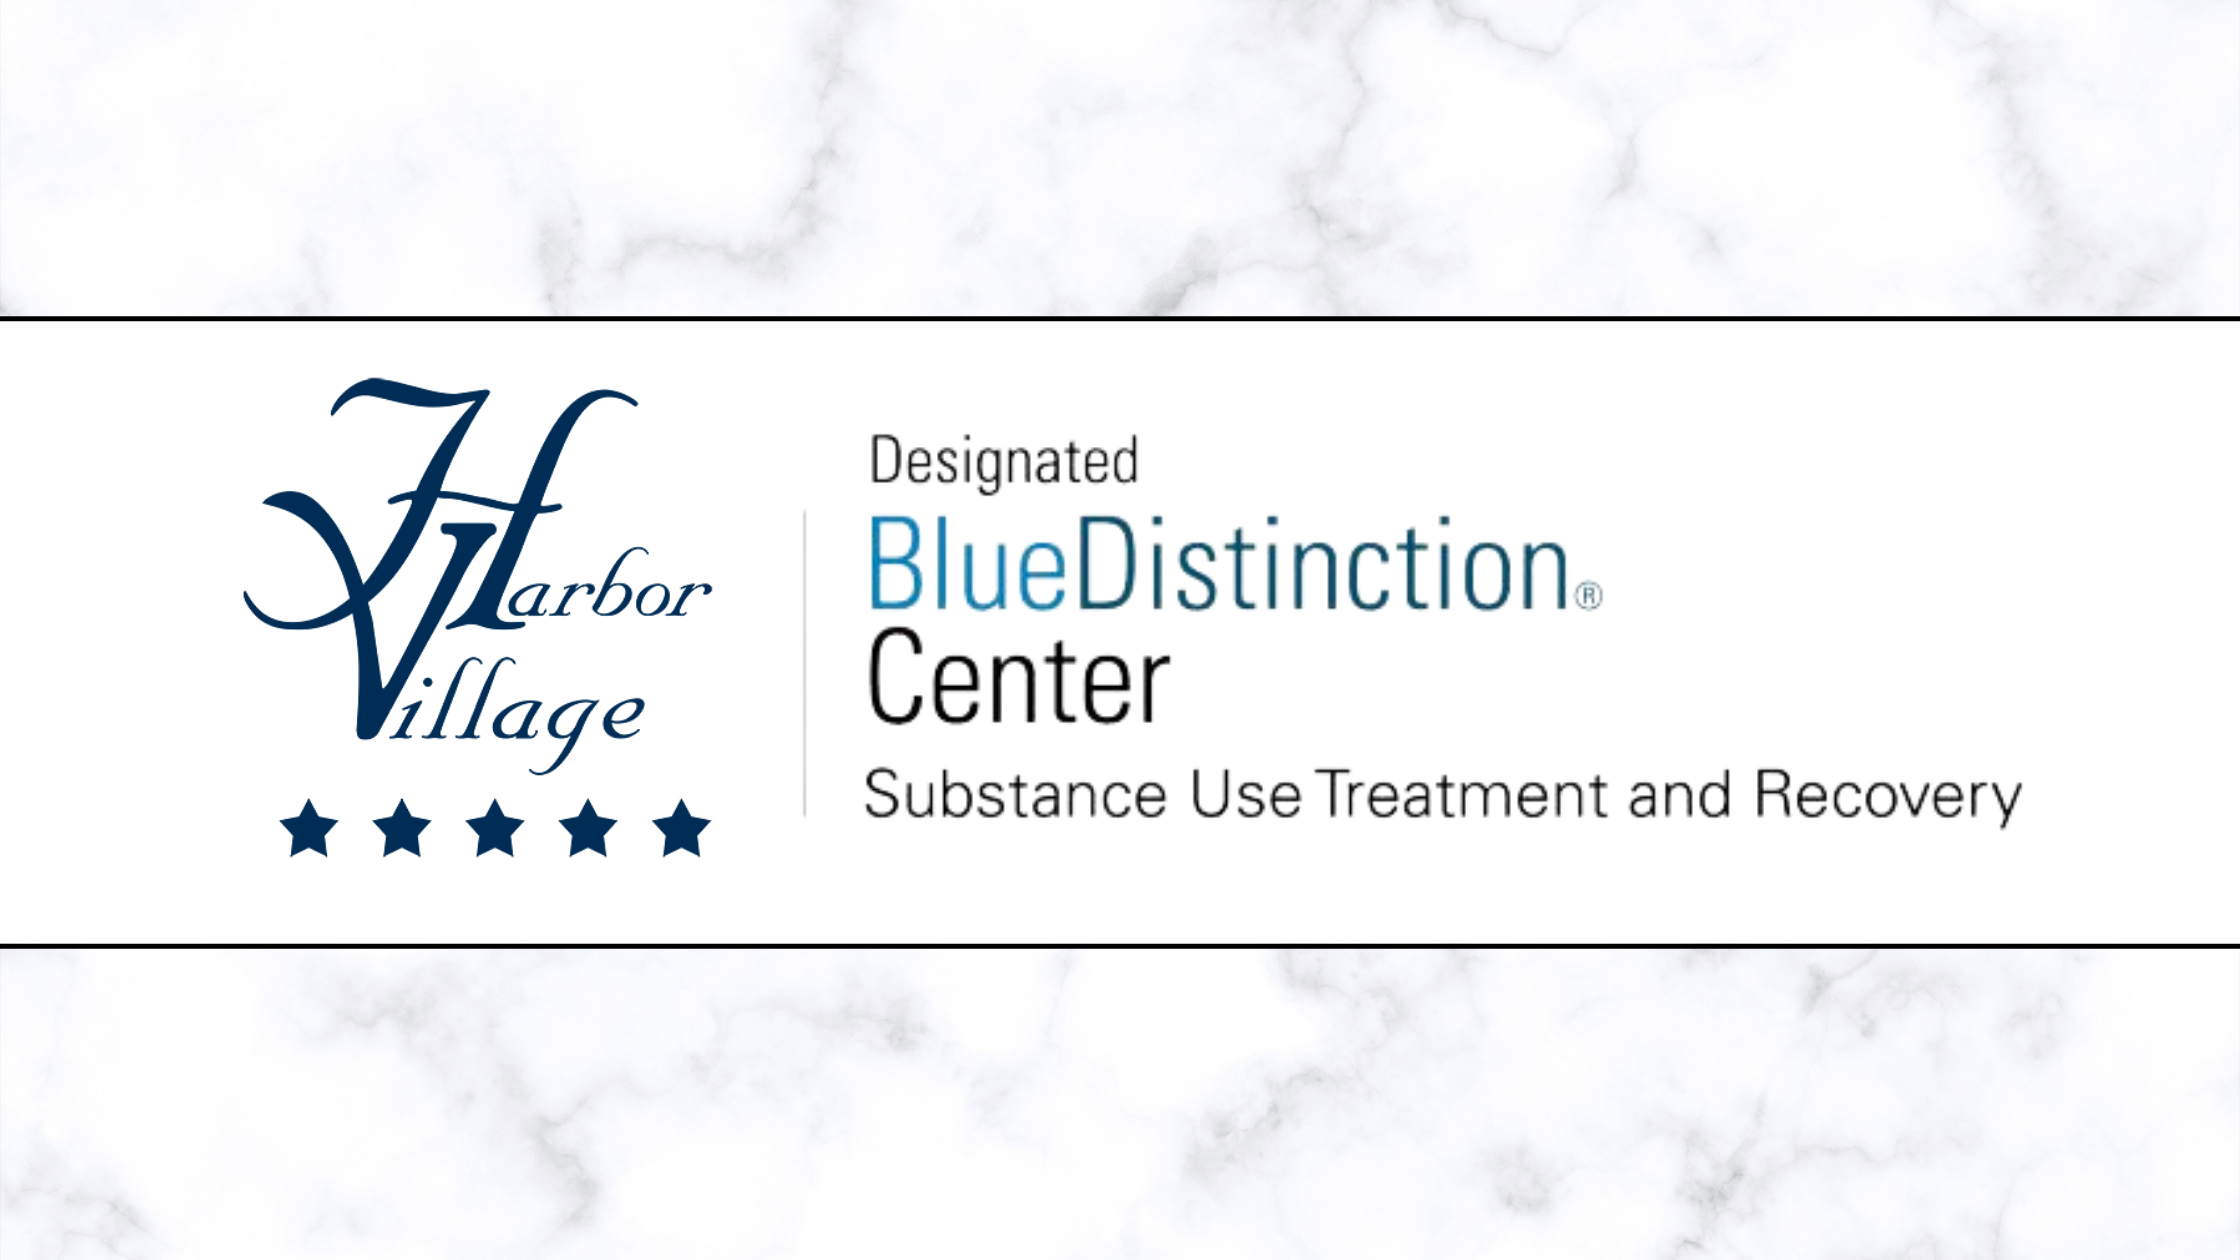 Harbor Village is Now a Blue Distinction Treatment Facility! Here’s What That Means